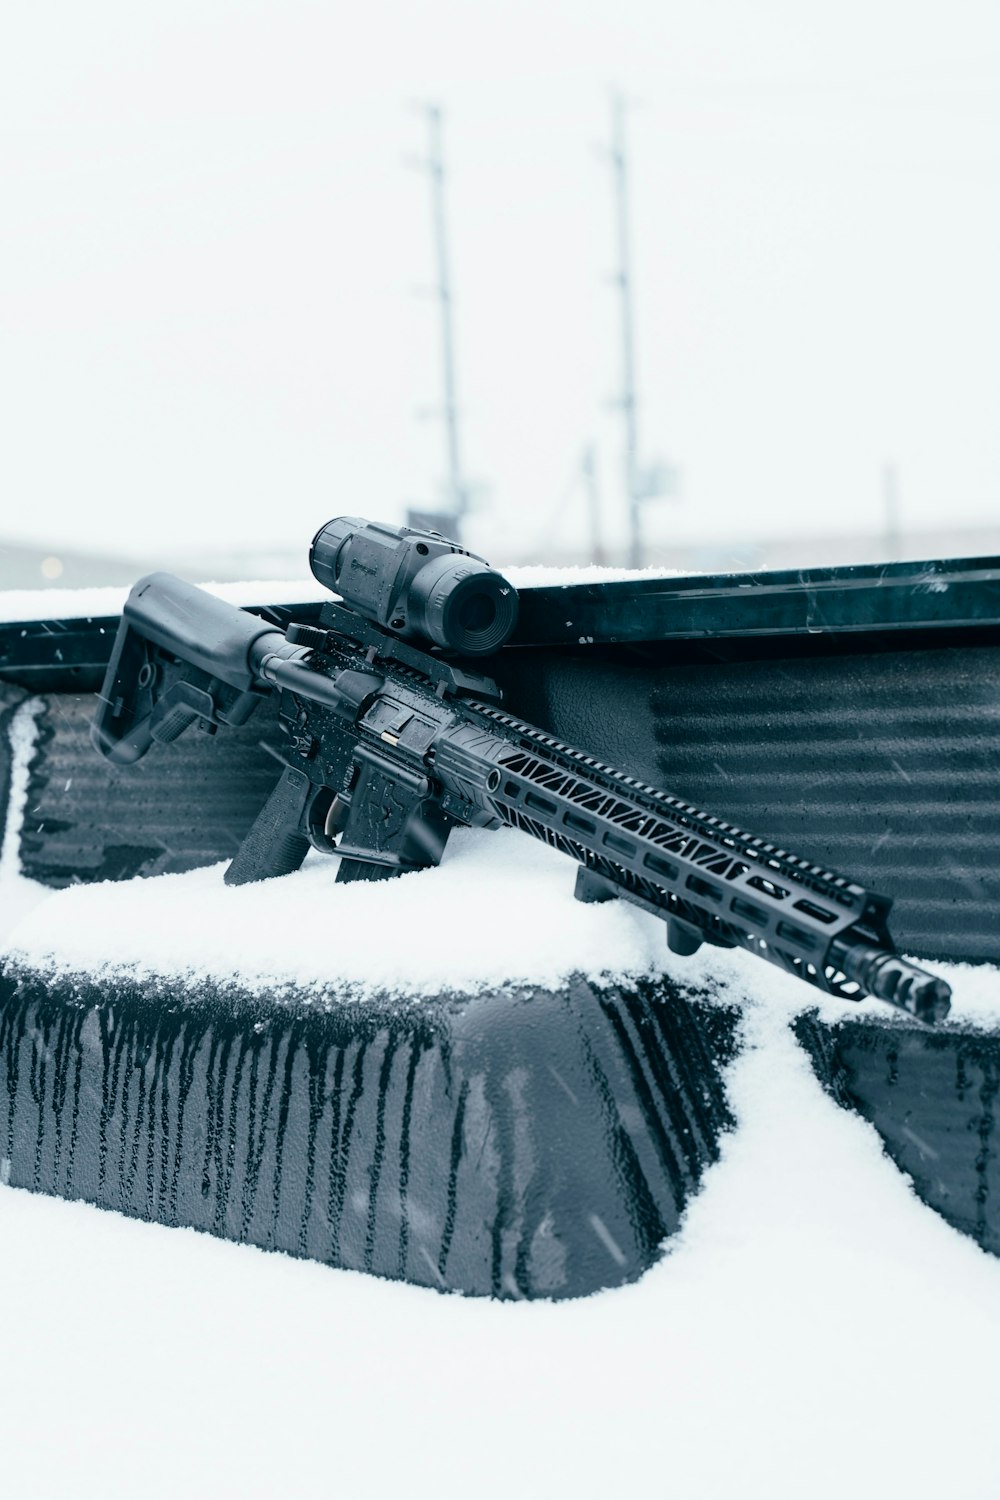 black assault rifle on snow covered ground